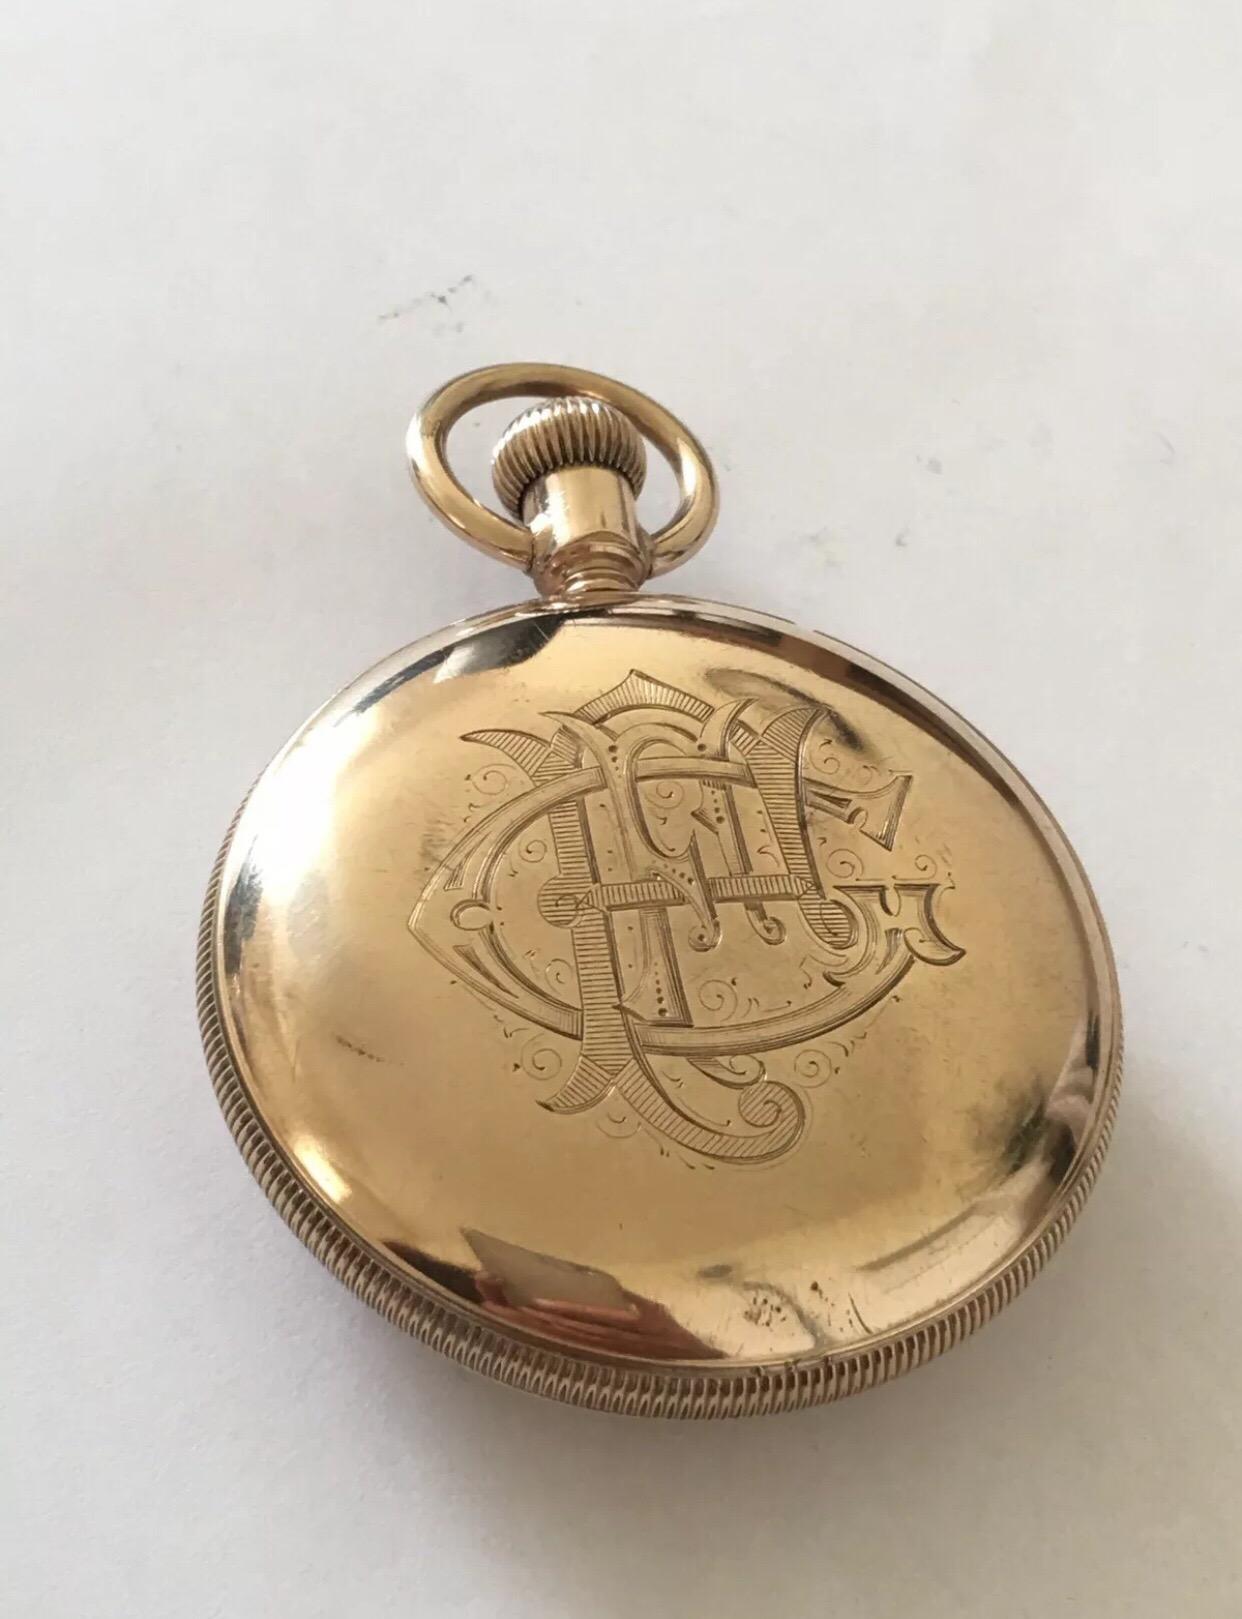 Antique Gold Filled Duplex Pocket Watch by Charles Benedict Waterbury Watch Co For Sale 3